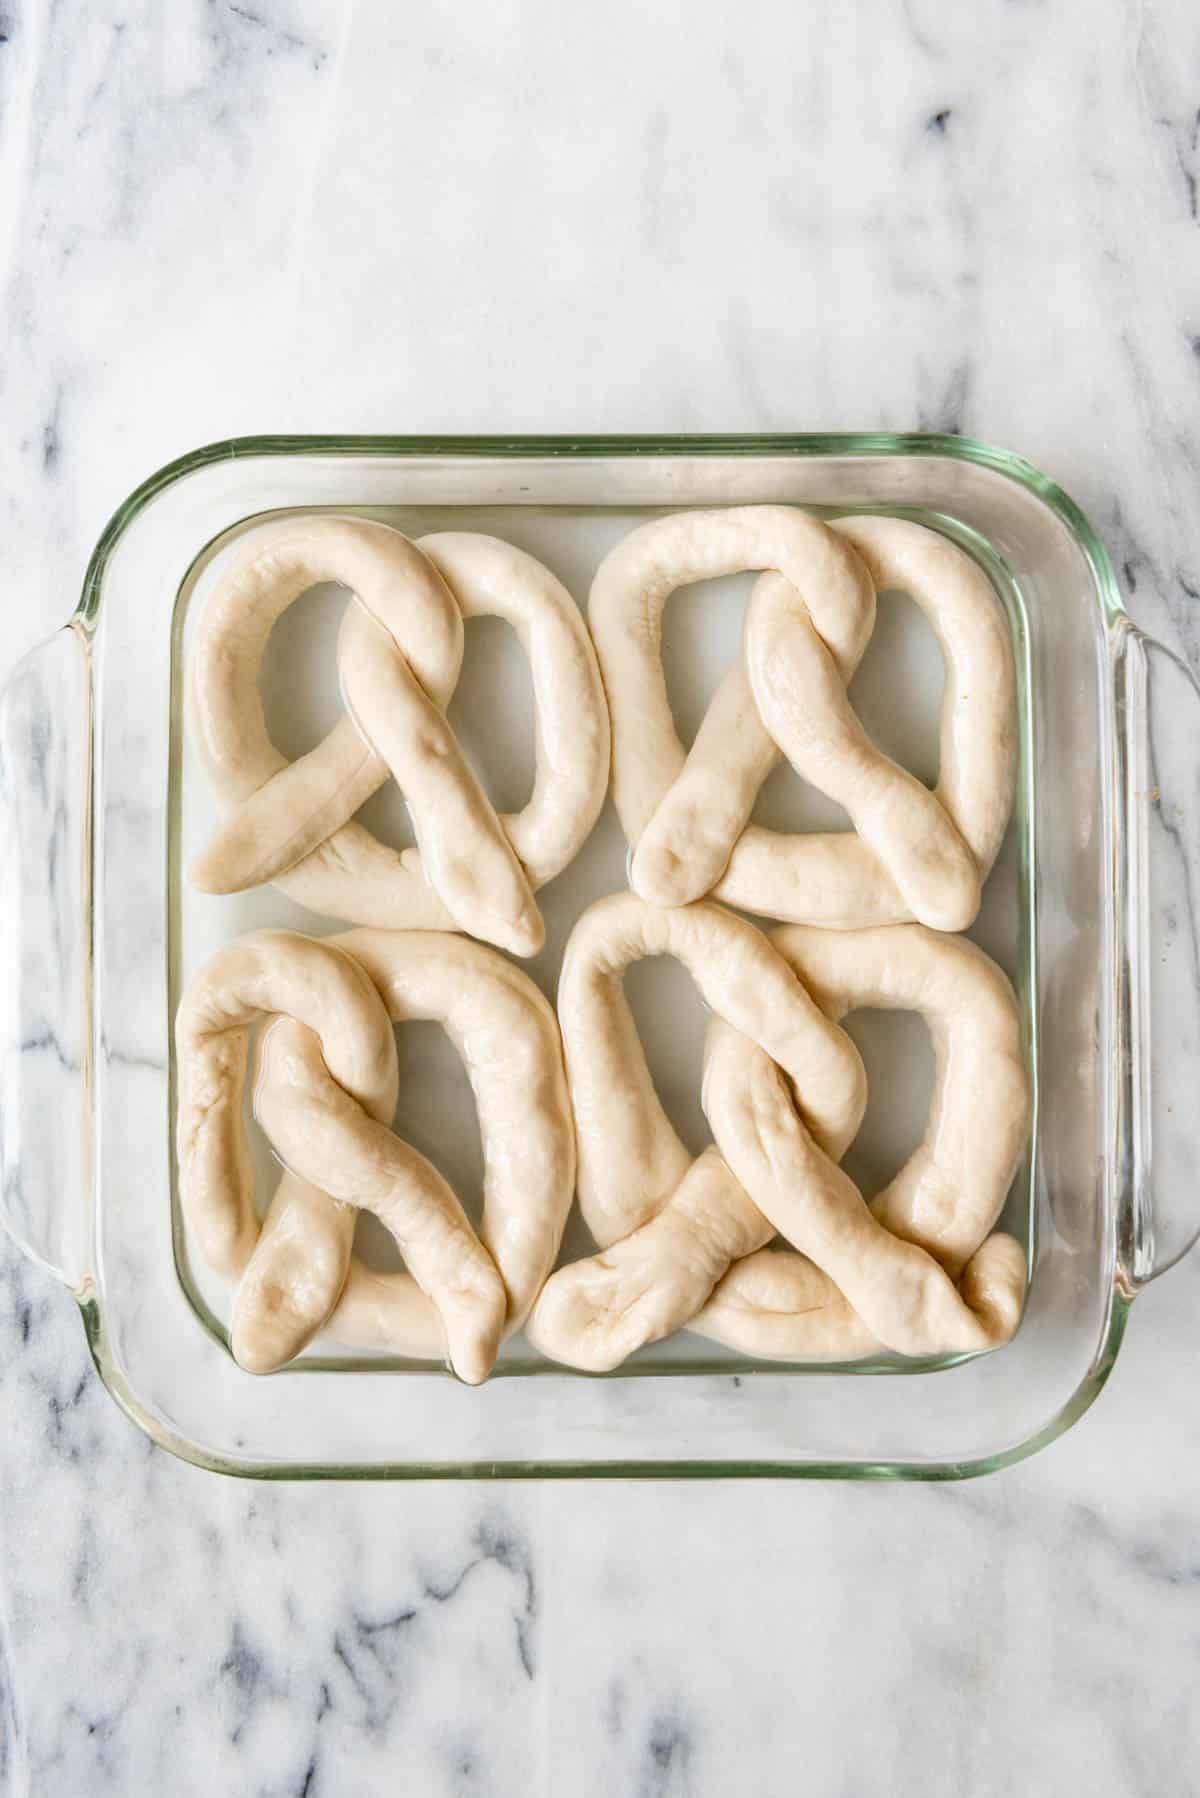 An image of 4 pretzels soaking in a baking soda bath in square dish.